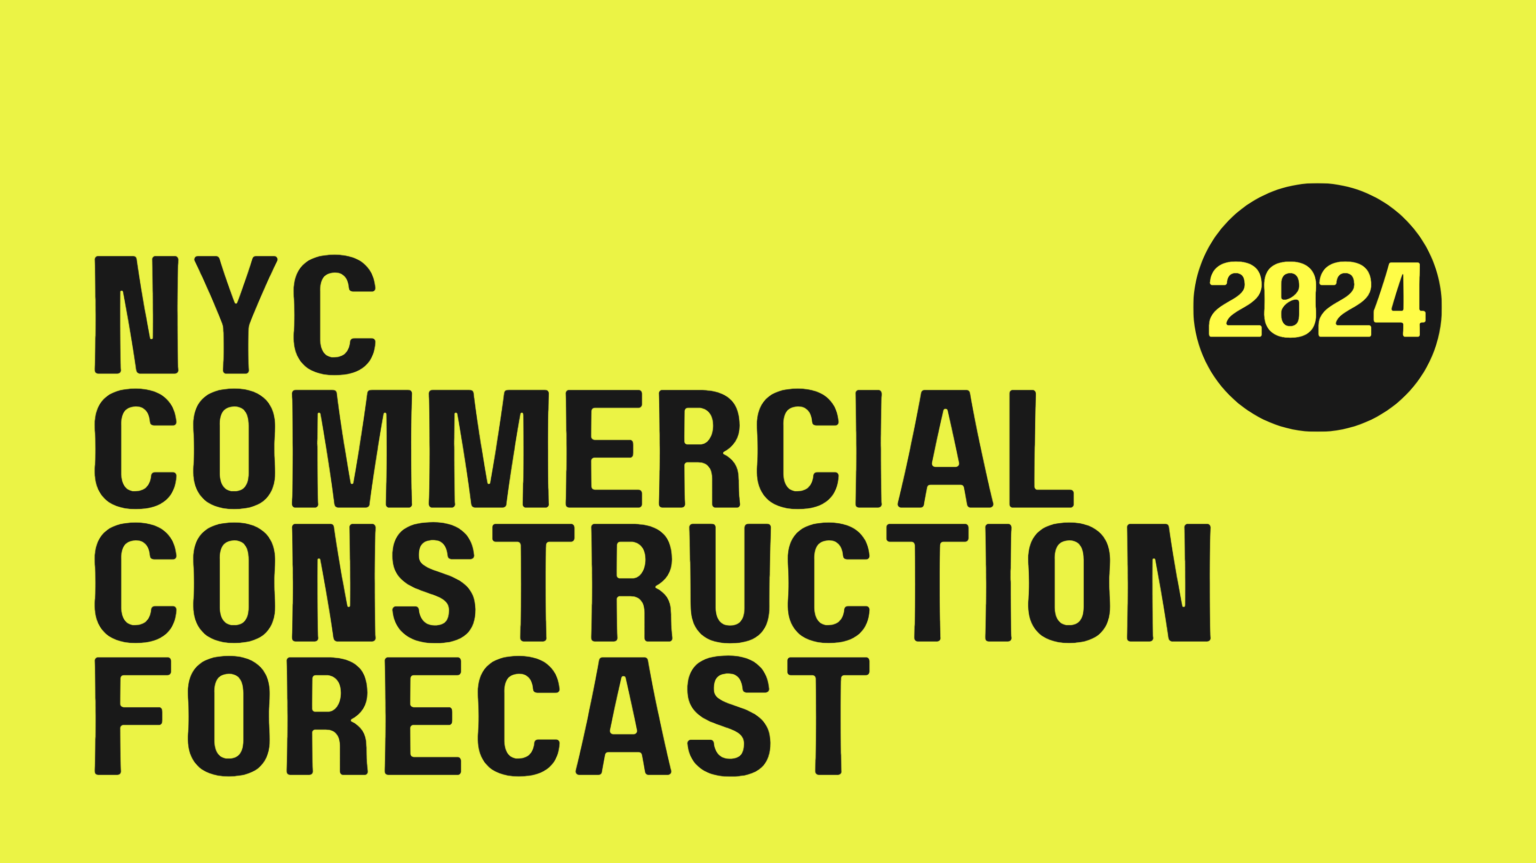 What’s in Store for 2024? NYC Commercial Construction Forecast